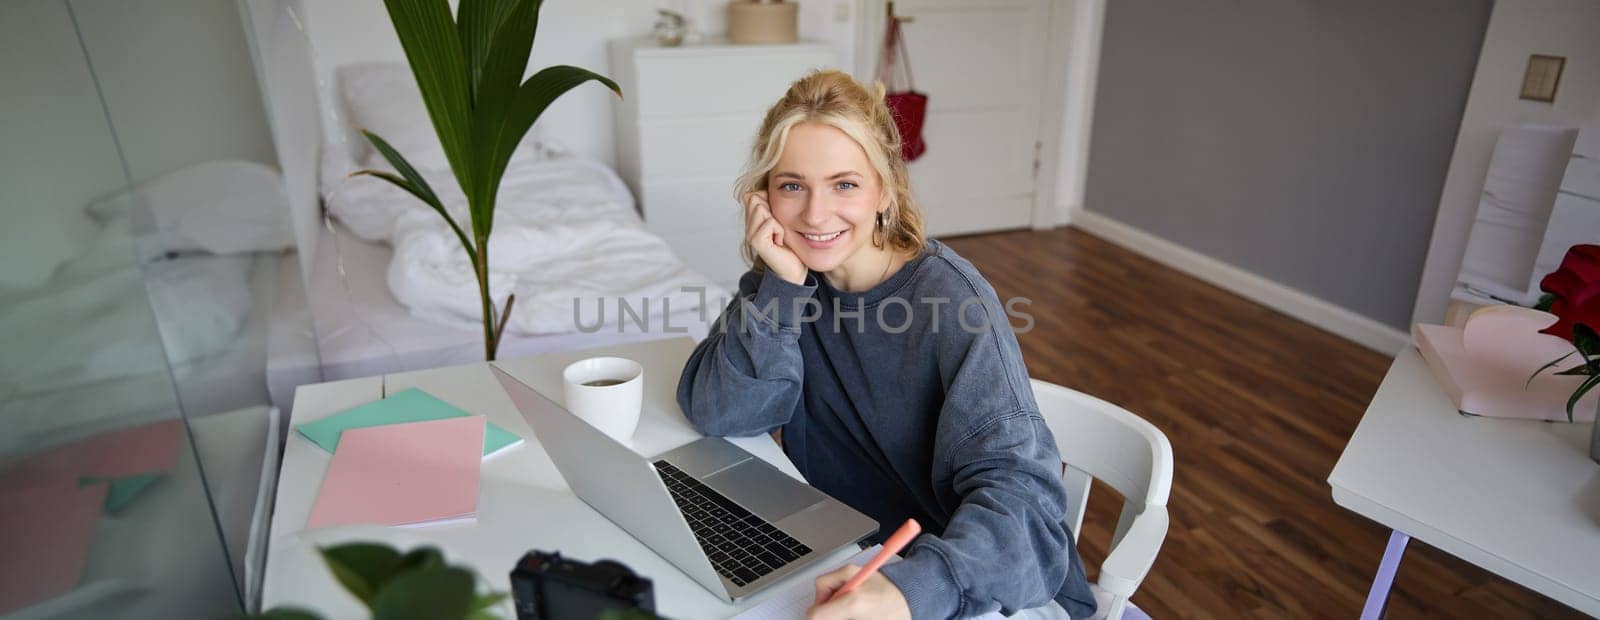 Portrait of young woman distance learning, working from home with laptop, making notes, student studying on remote, doing online course.